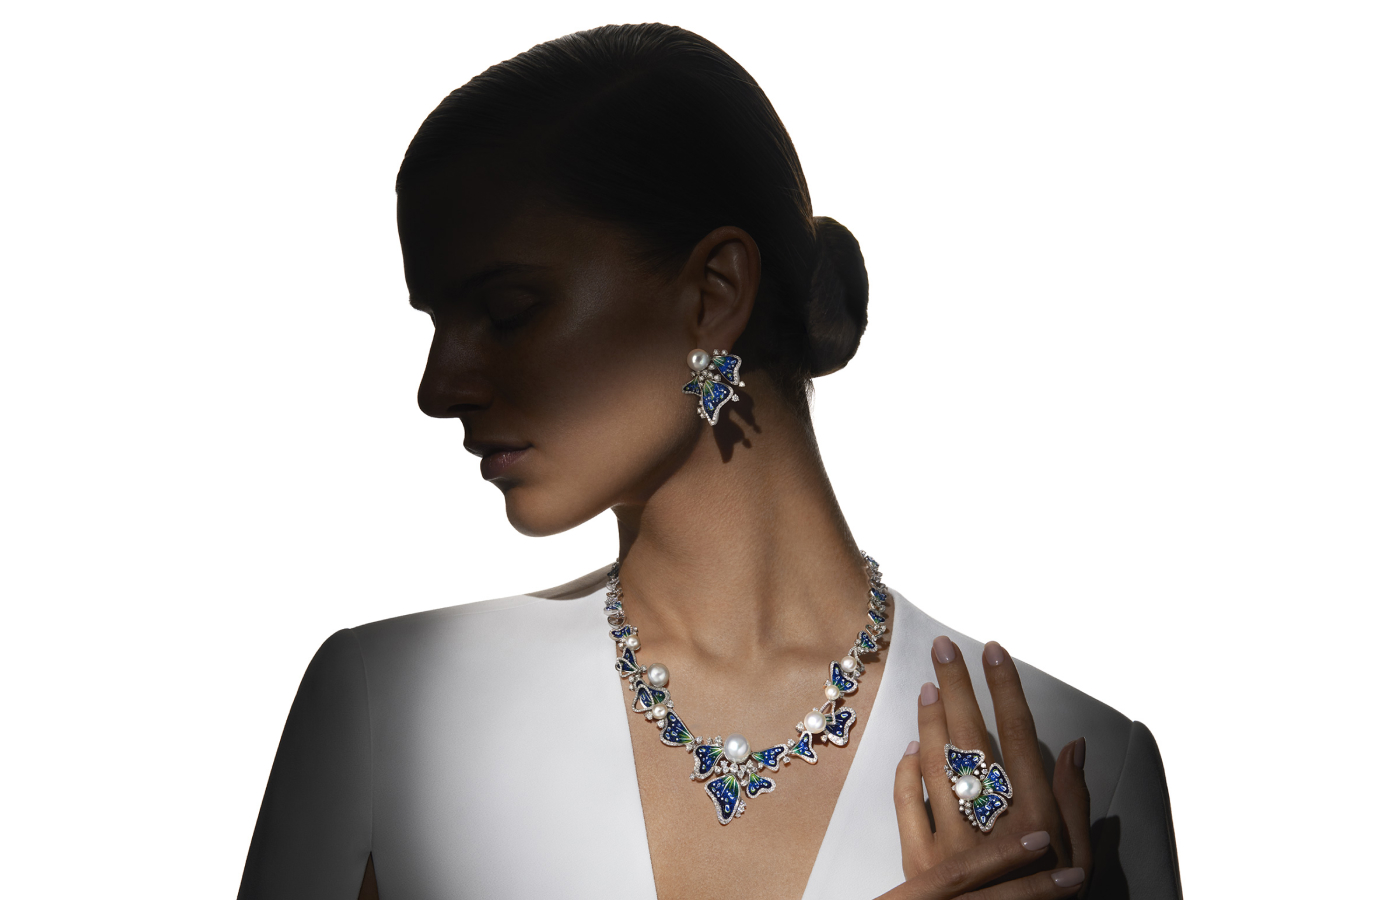 The Unique Show participant SICIS will present high jewellery, such as this Sea Anemone parure set with micromosaics, diamonds and Australian pearls in white gold at Luxury St Moritz in February 2024